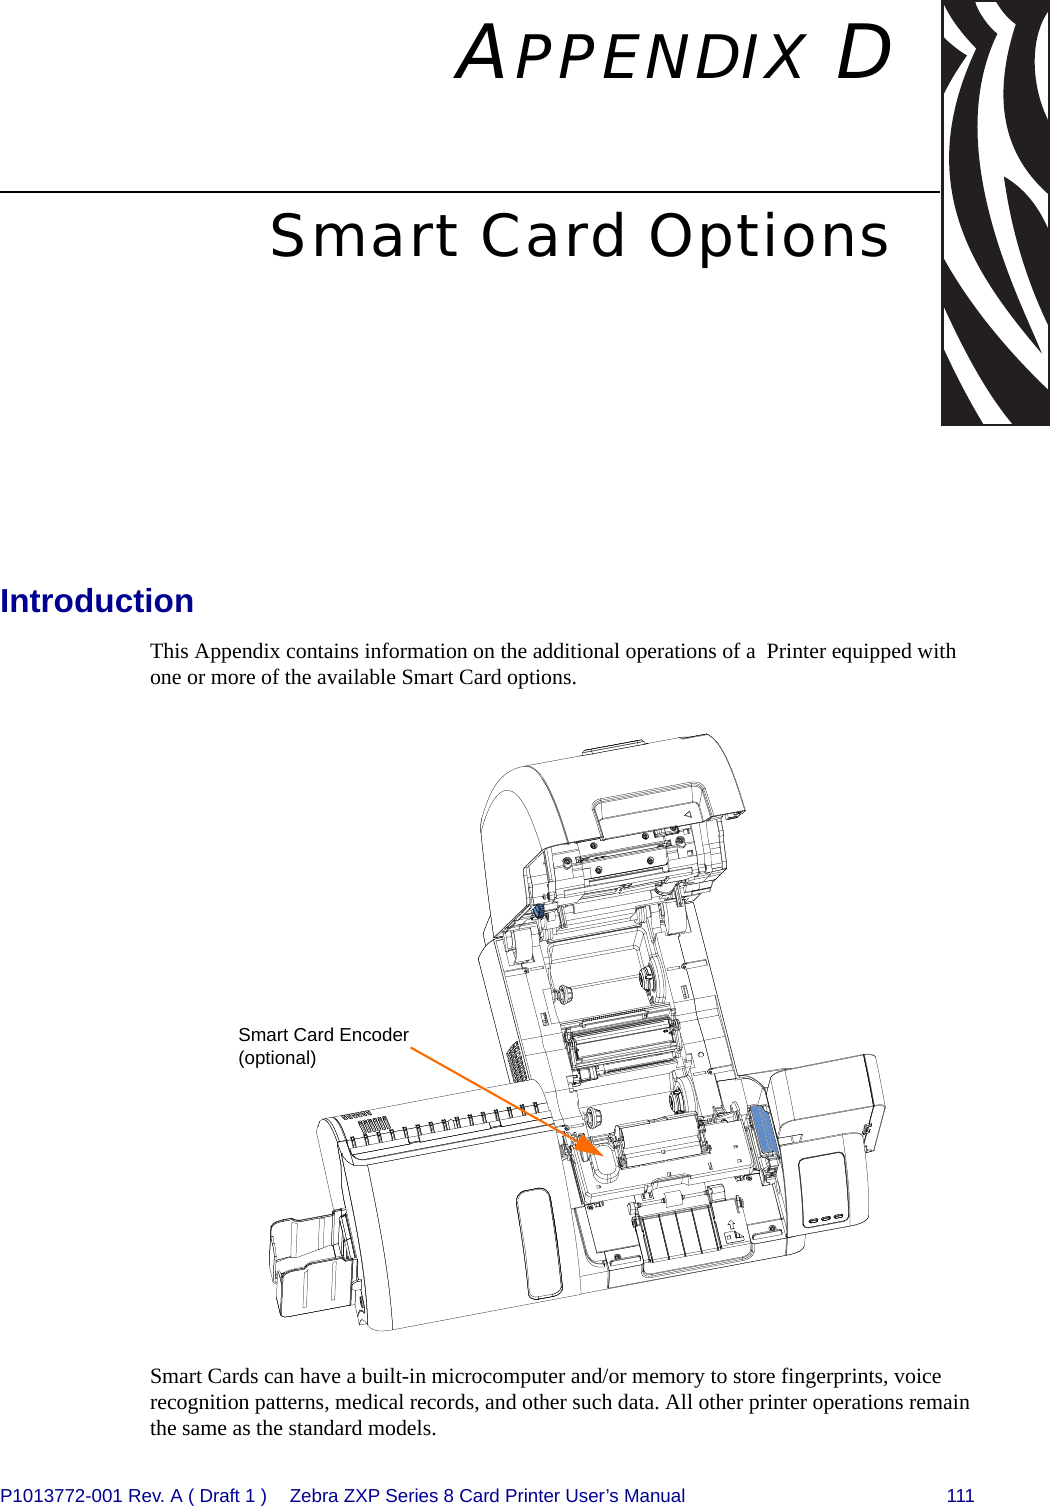 P1013772-001 Rev. A ( Draft 1 ) Zebra ZXP Series 8 Card Printer User’s Manual 111APPENDIX DSmart Card OptionsIntroductionThis Appendix contains information on the additional operations of a  Printer equipped with one or more of the available Smart Card options.Smart Cards can have a built-in microcomputer and/or memory to store fingerprints, voice recognition patterns, medical records, and other such data. All other printer operations remain the same as the standard models.Smart Card Encoder (optional) 